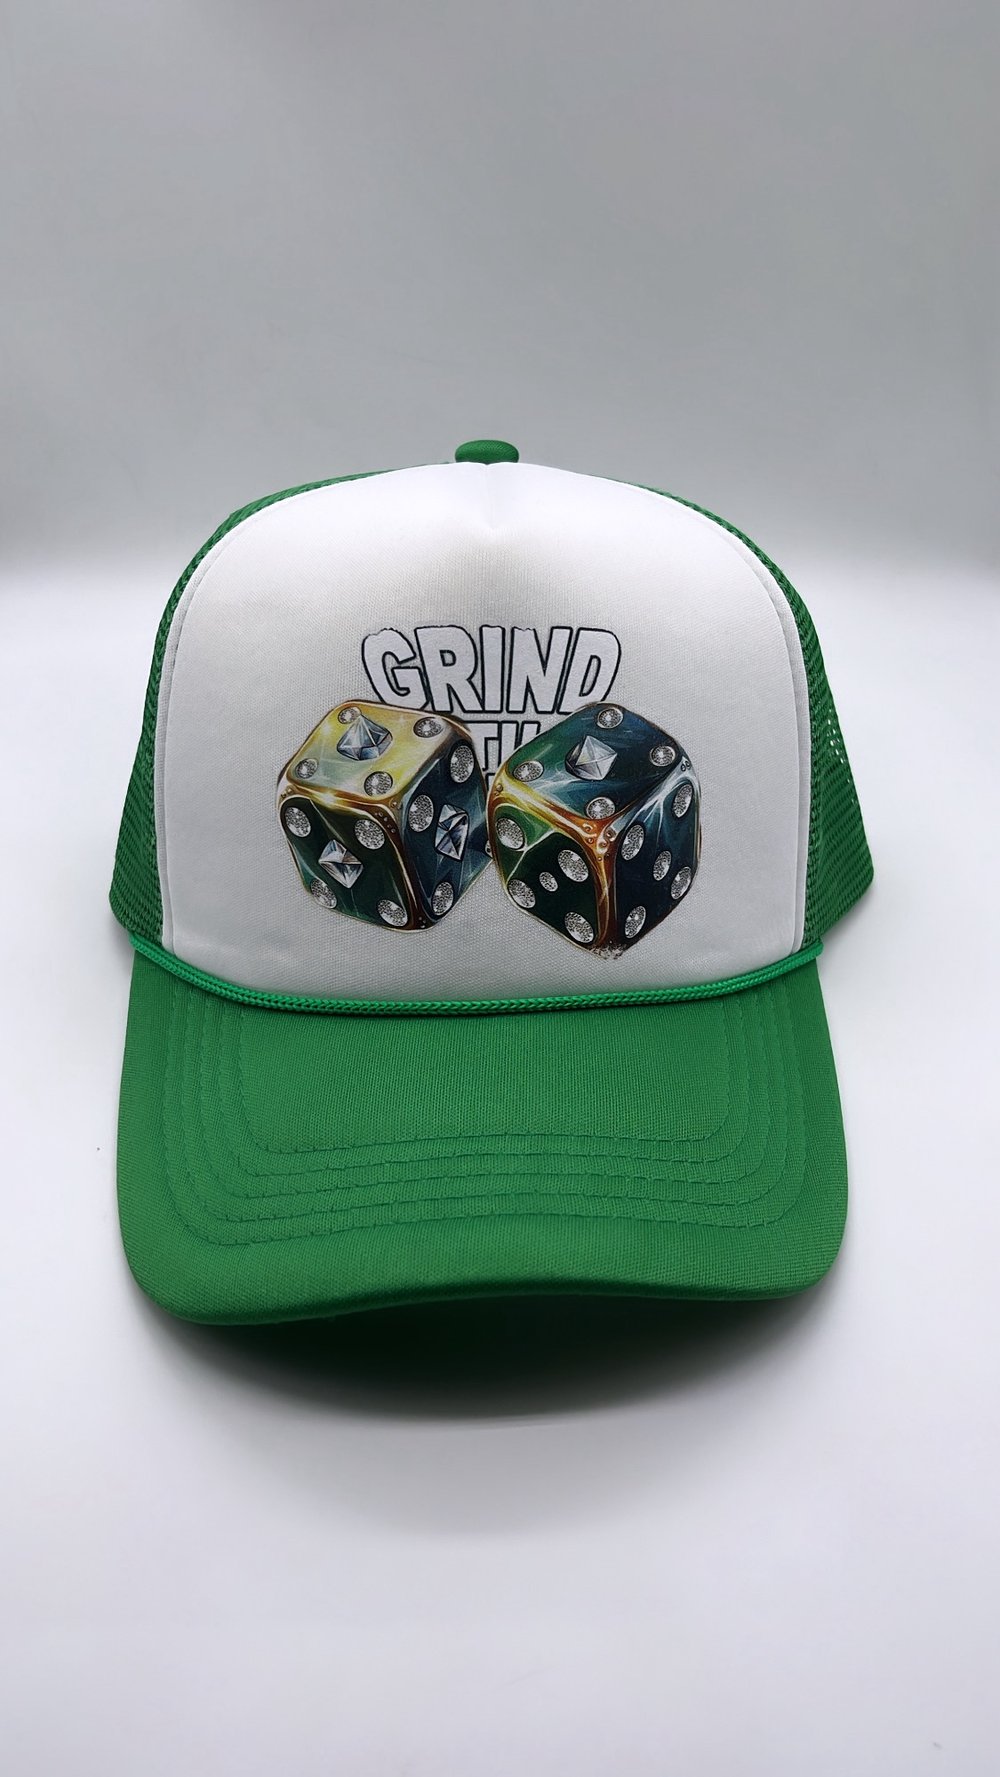 GUUD "Pair-A-Dice" Trucker Hat